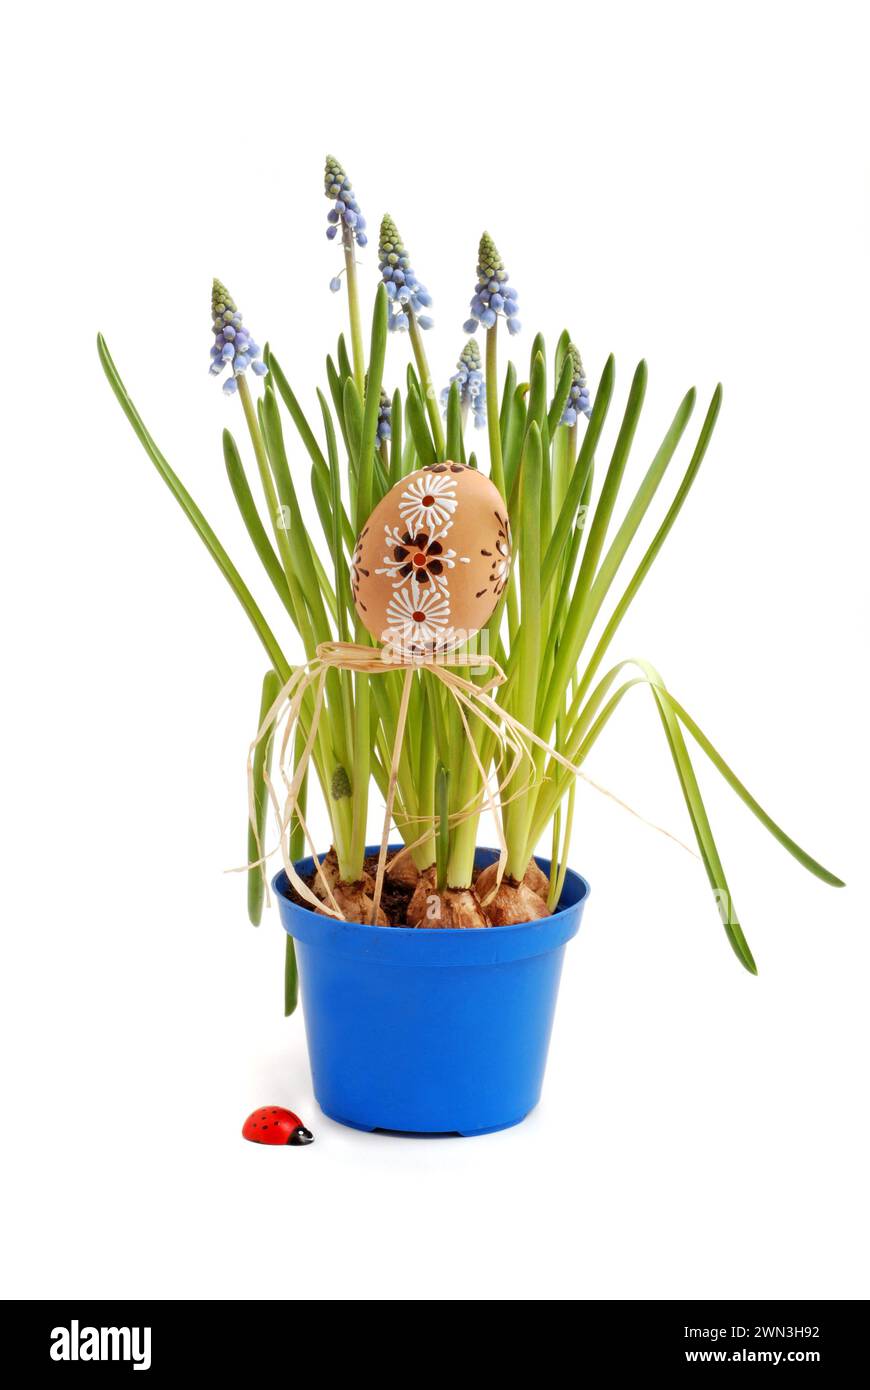 Spring flowers muscari hyacinth in pot and easter egg. Stock Photo